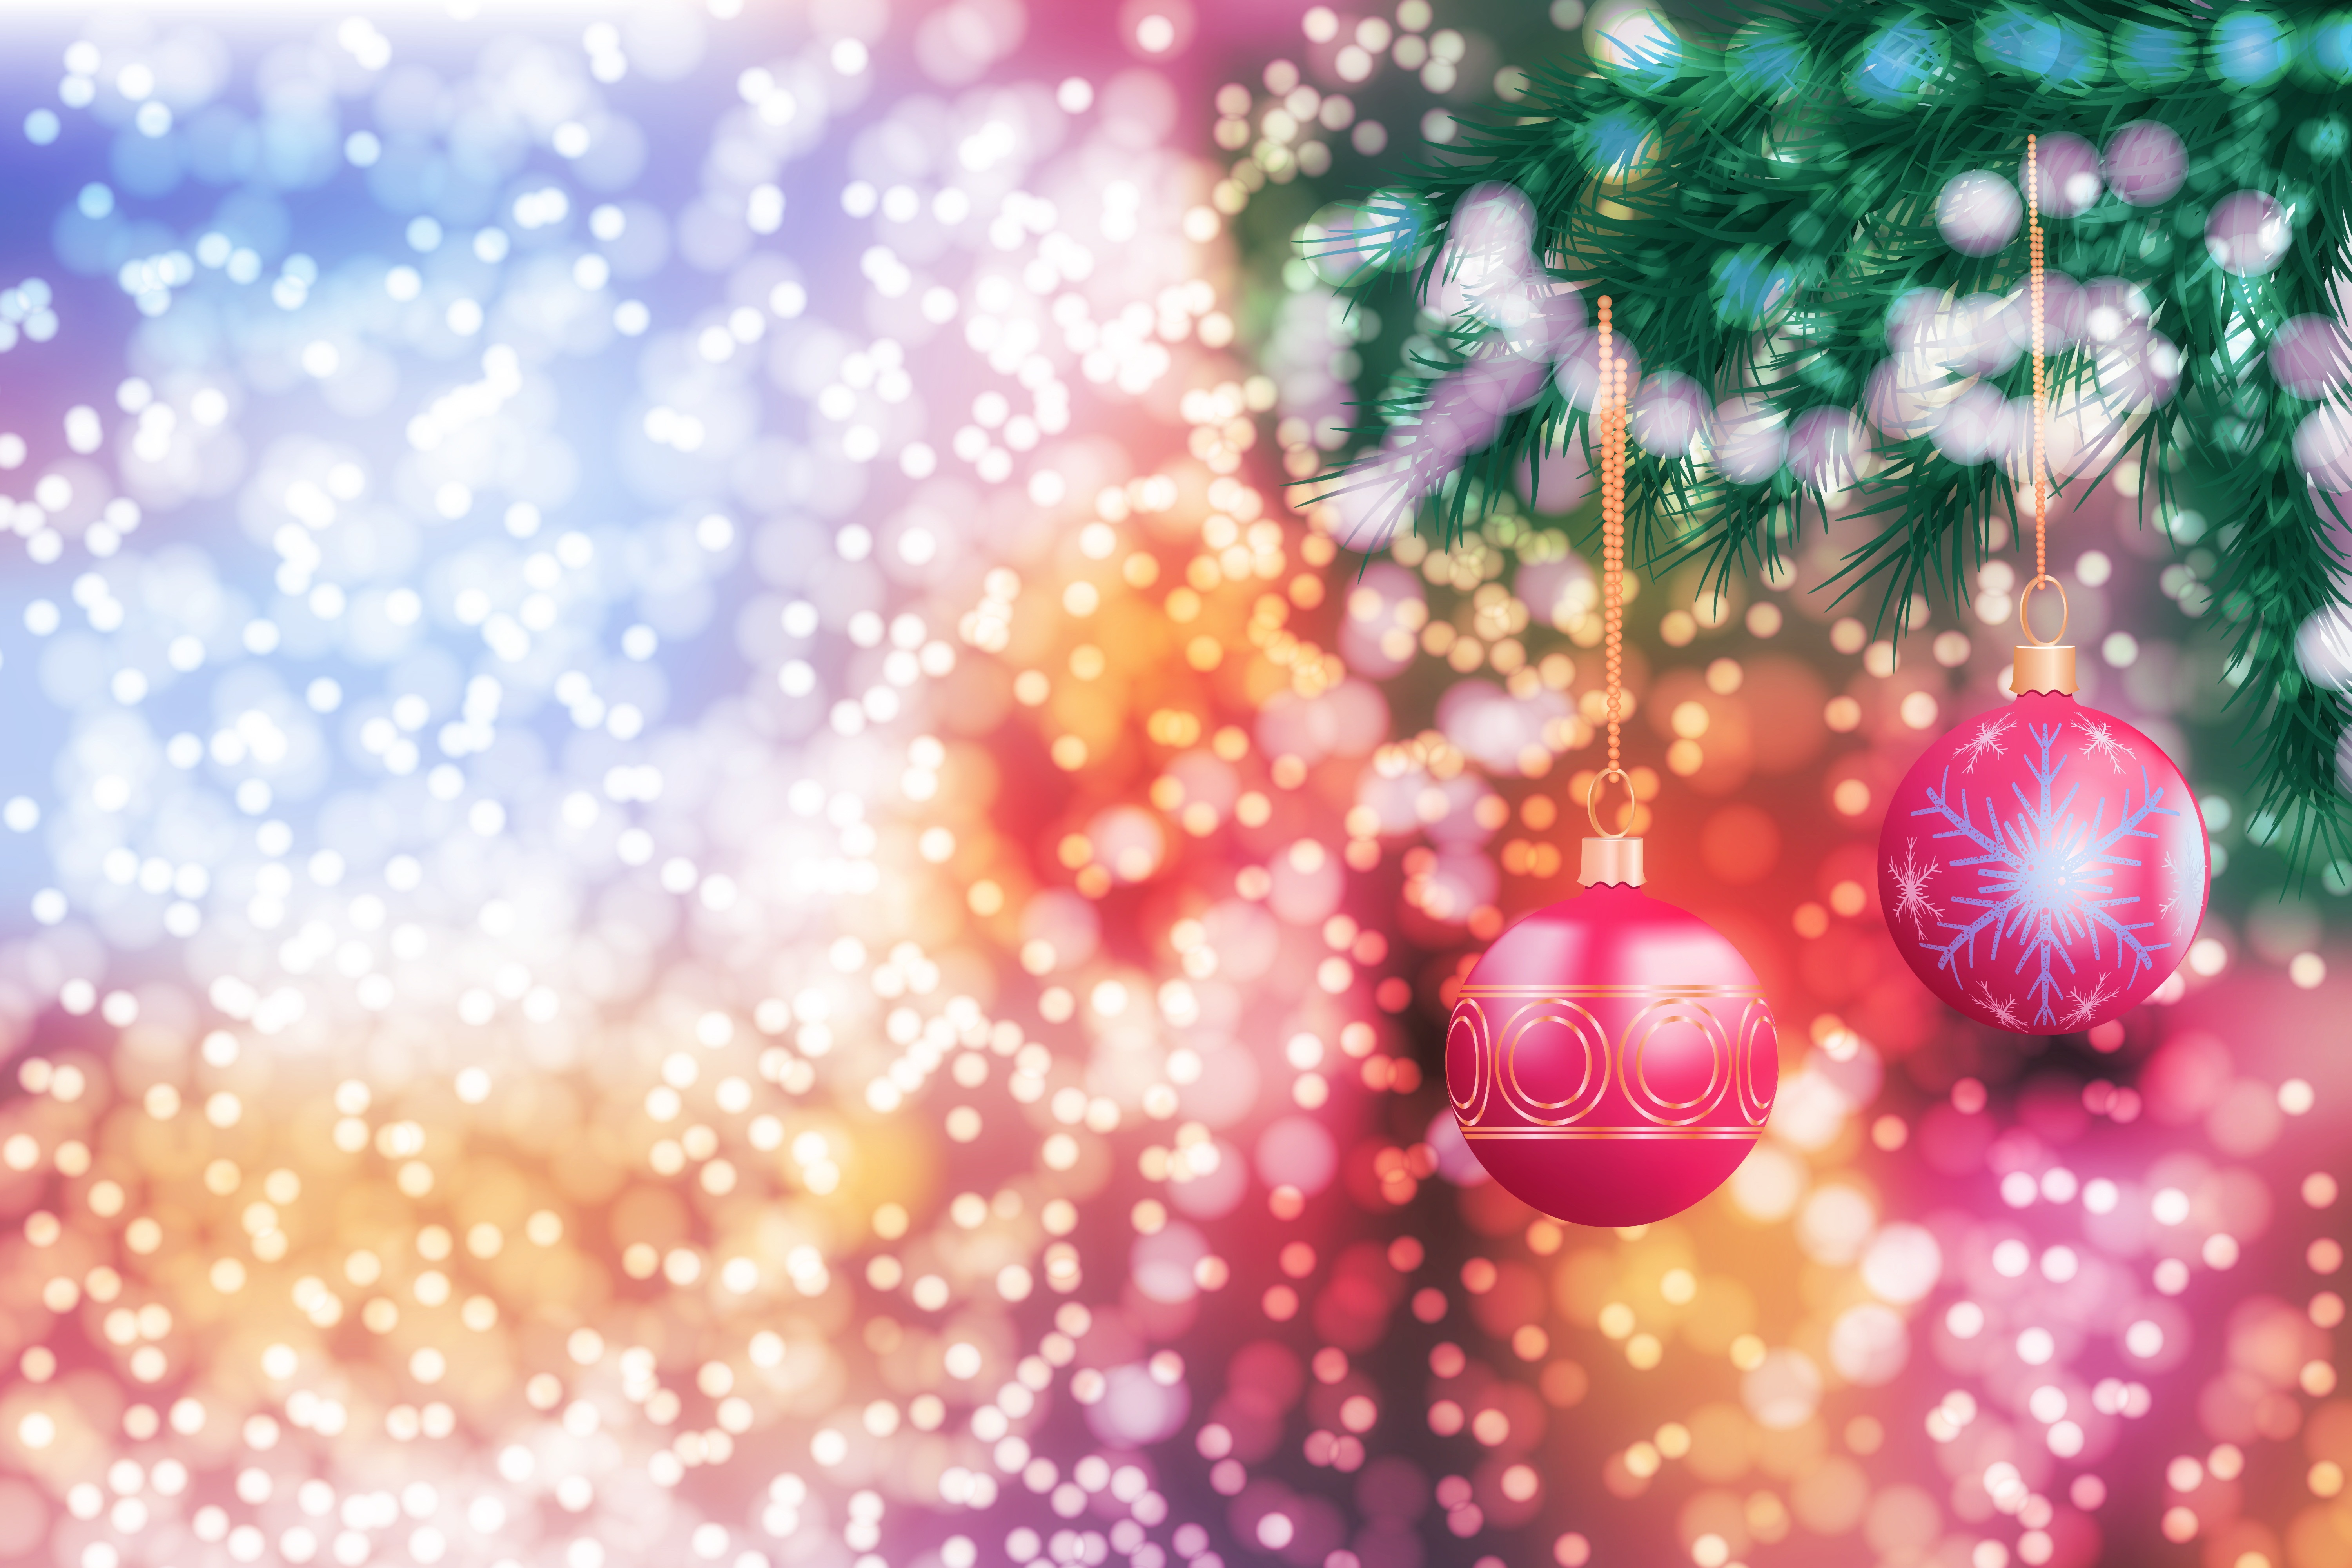 113573 download wallpaper christmas decorations, holidays, new year, christmas, branch, christmas tree toys, balls screensavers and pictures for free